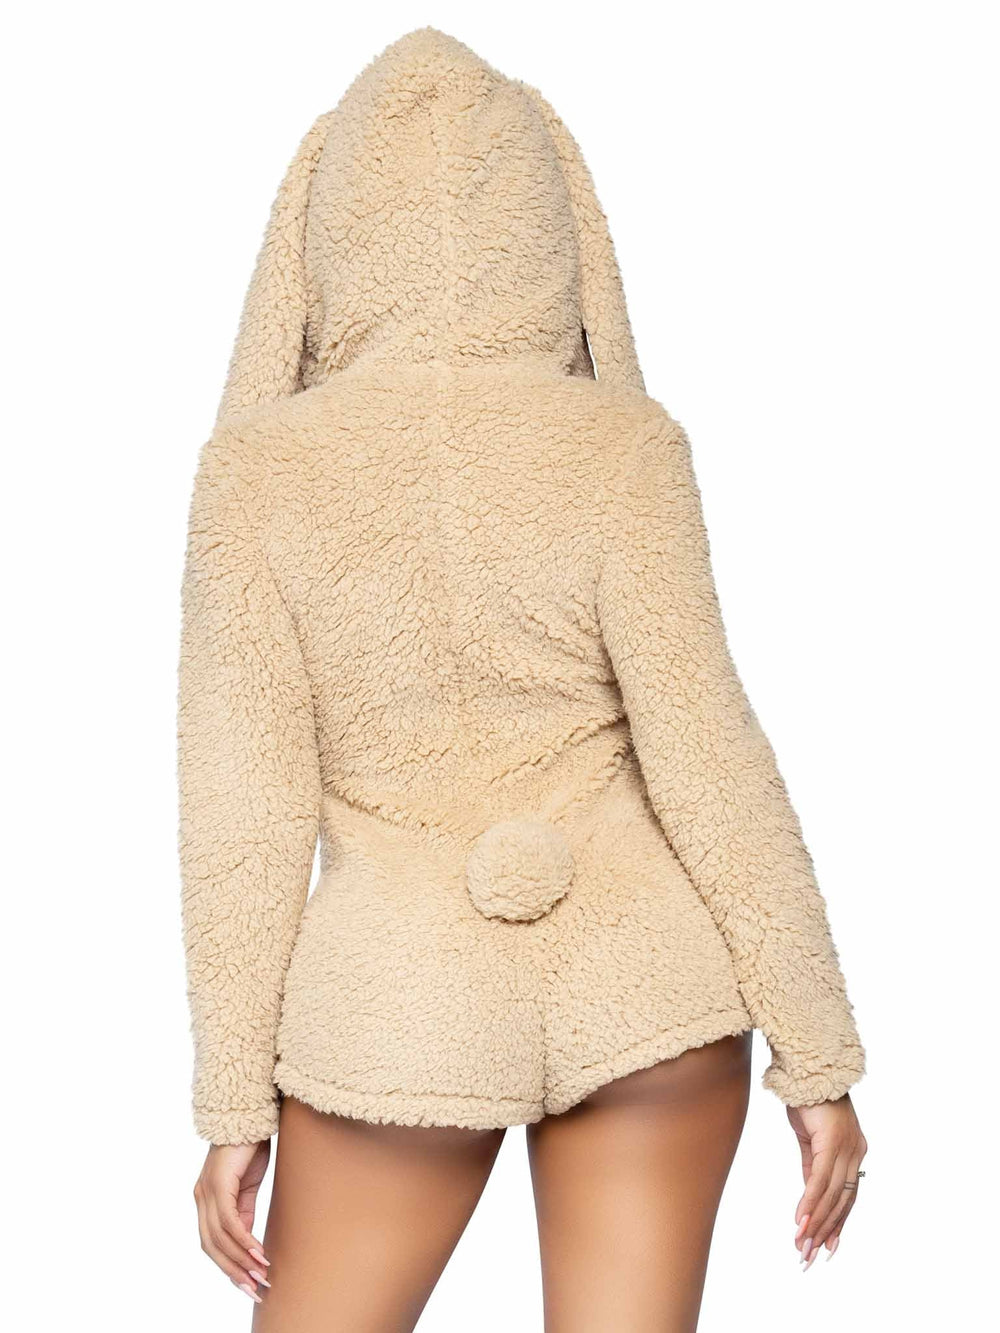 Image of the back of the Cuddle Bunny Ultra Soft Zip Up Teddy Romper showing the fluffy tail and sexy cheeky bottoms.